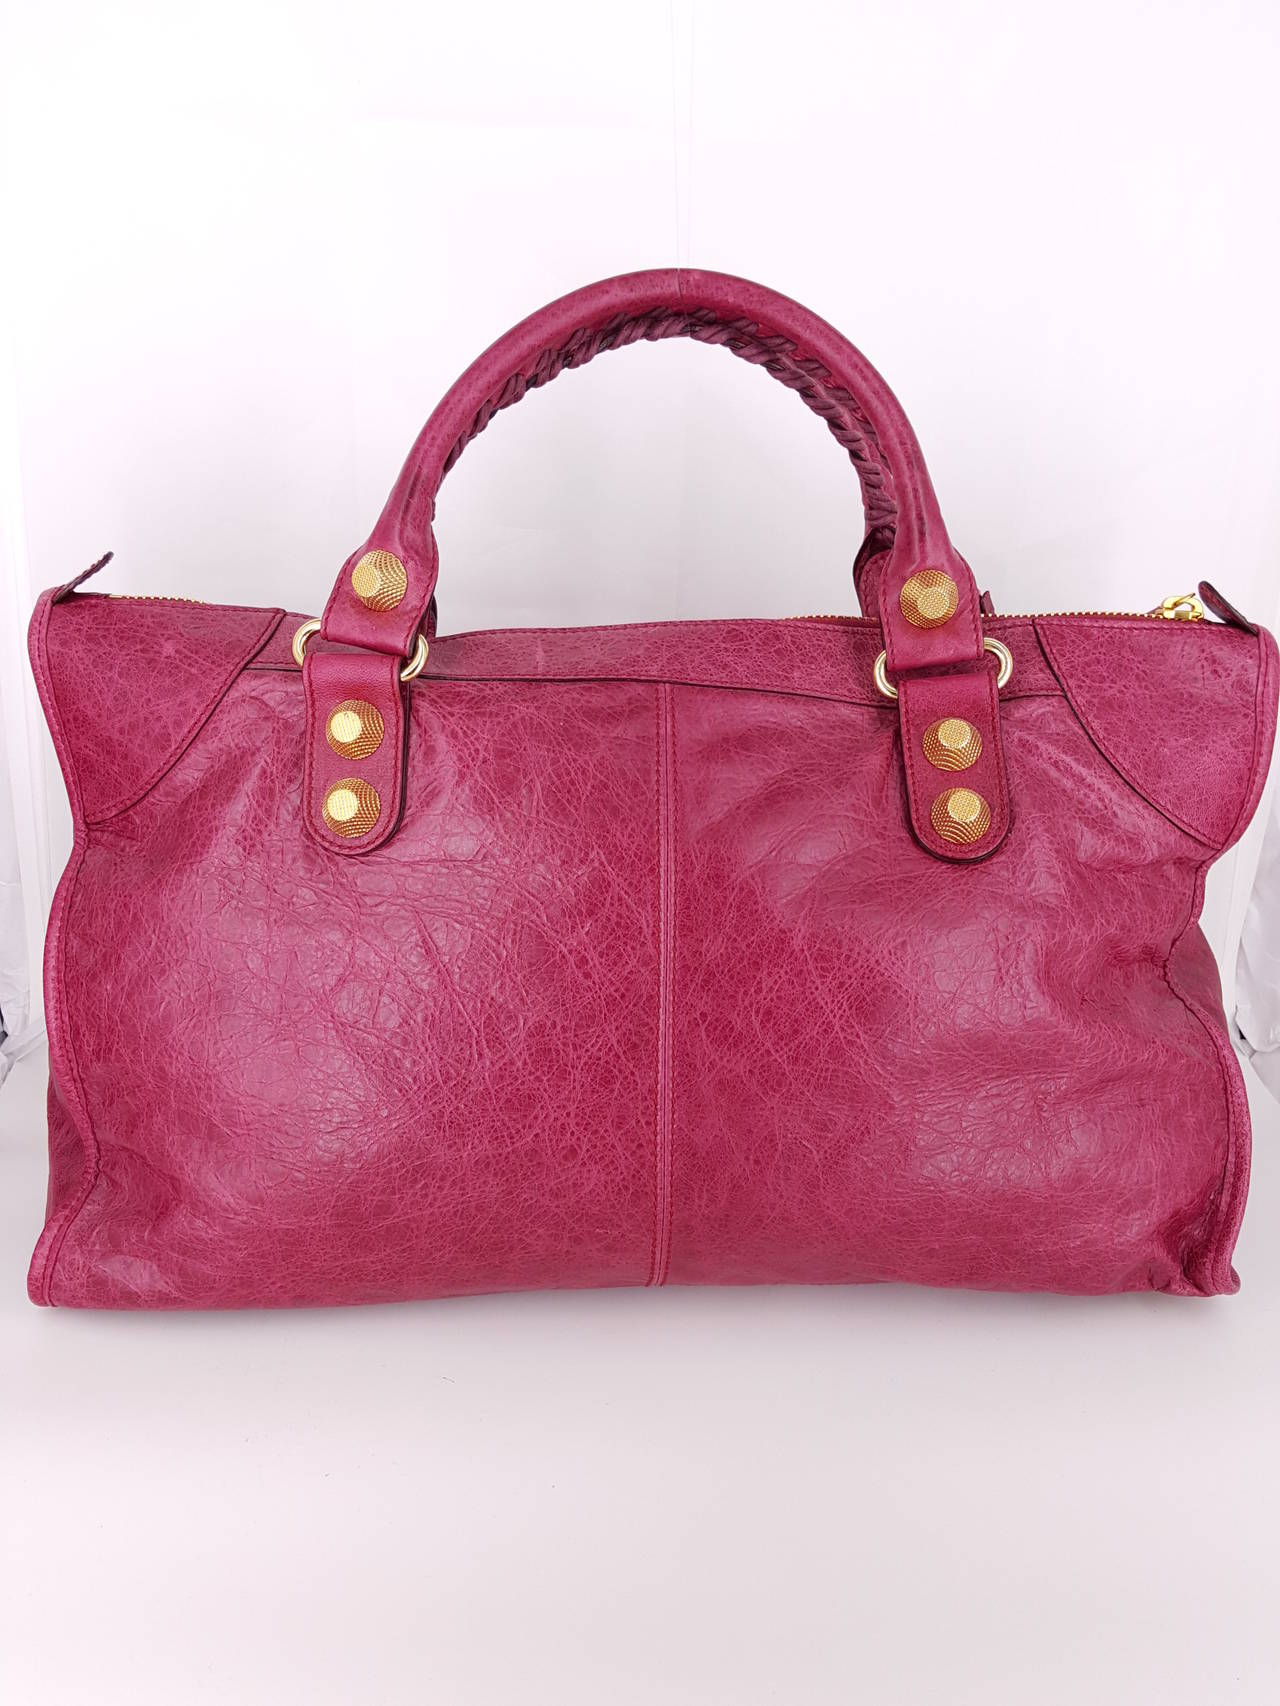 Offered for sale is a large Balenciaga Work City bag in stunning Magenta distressed leather in perfect condition.  This is a great handbag or travel bag and for it's size, is very light weight.  The magenta leather with the gold hardware makes a